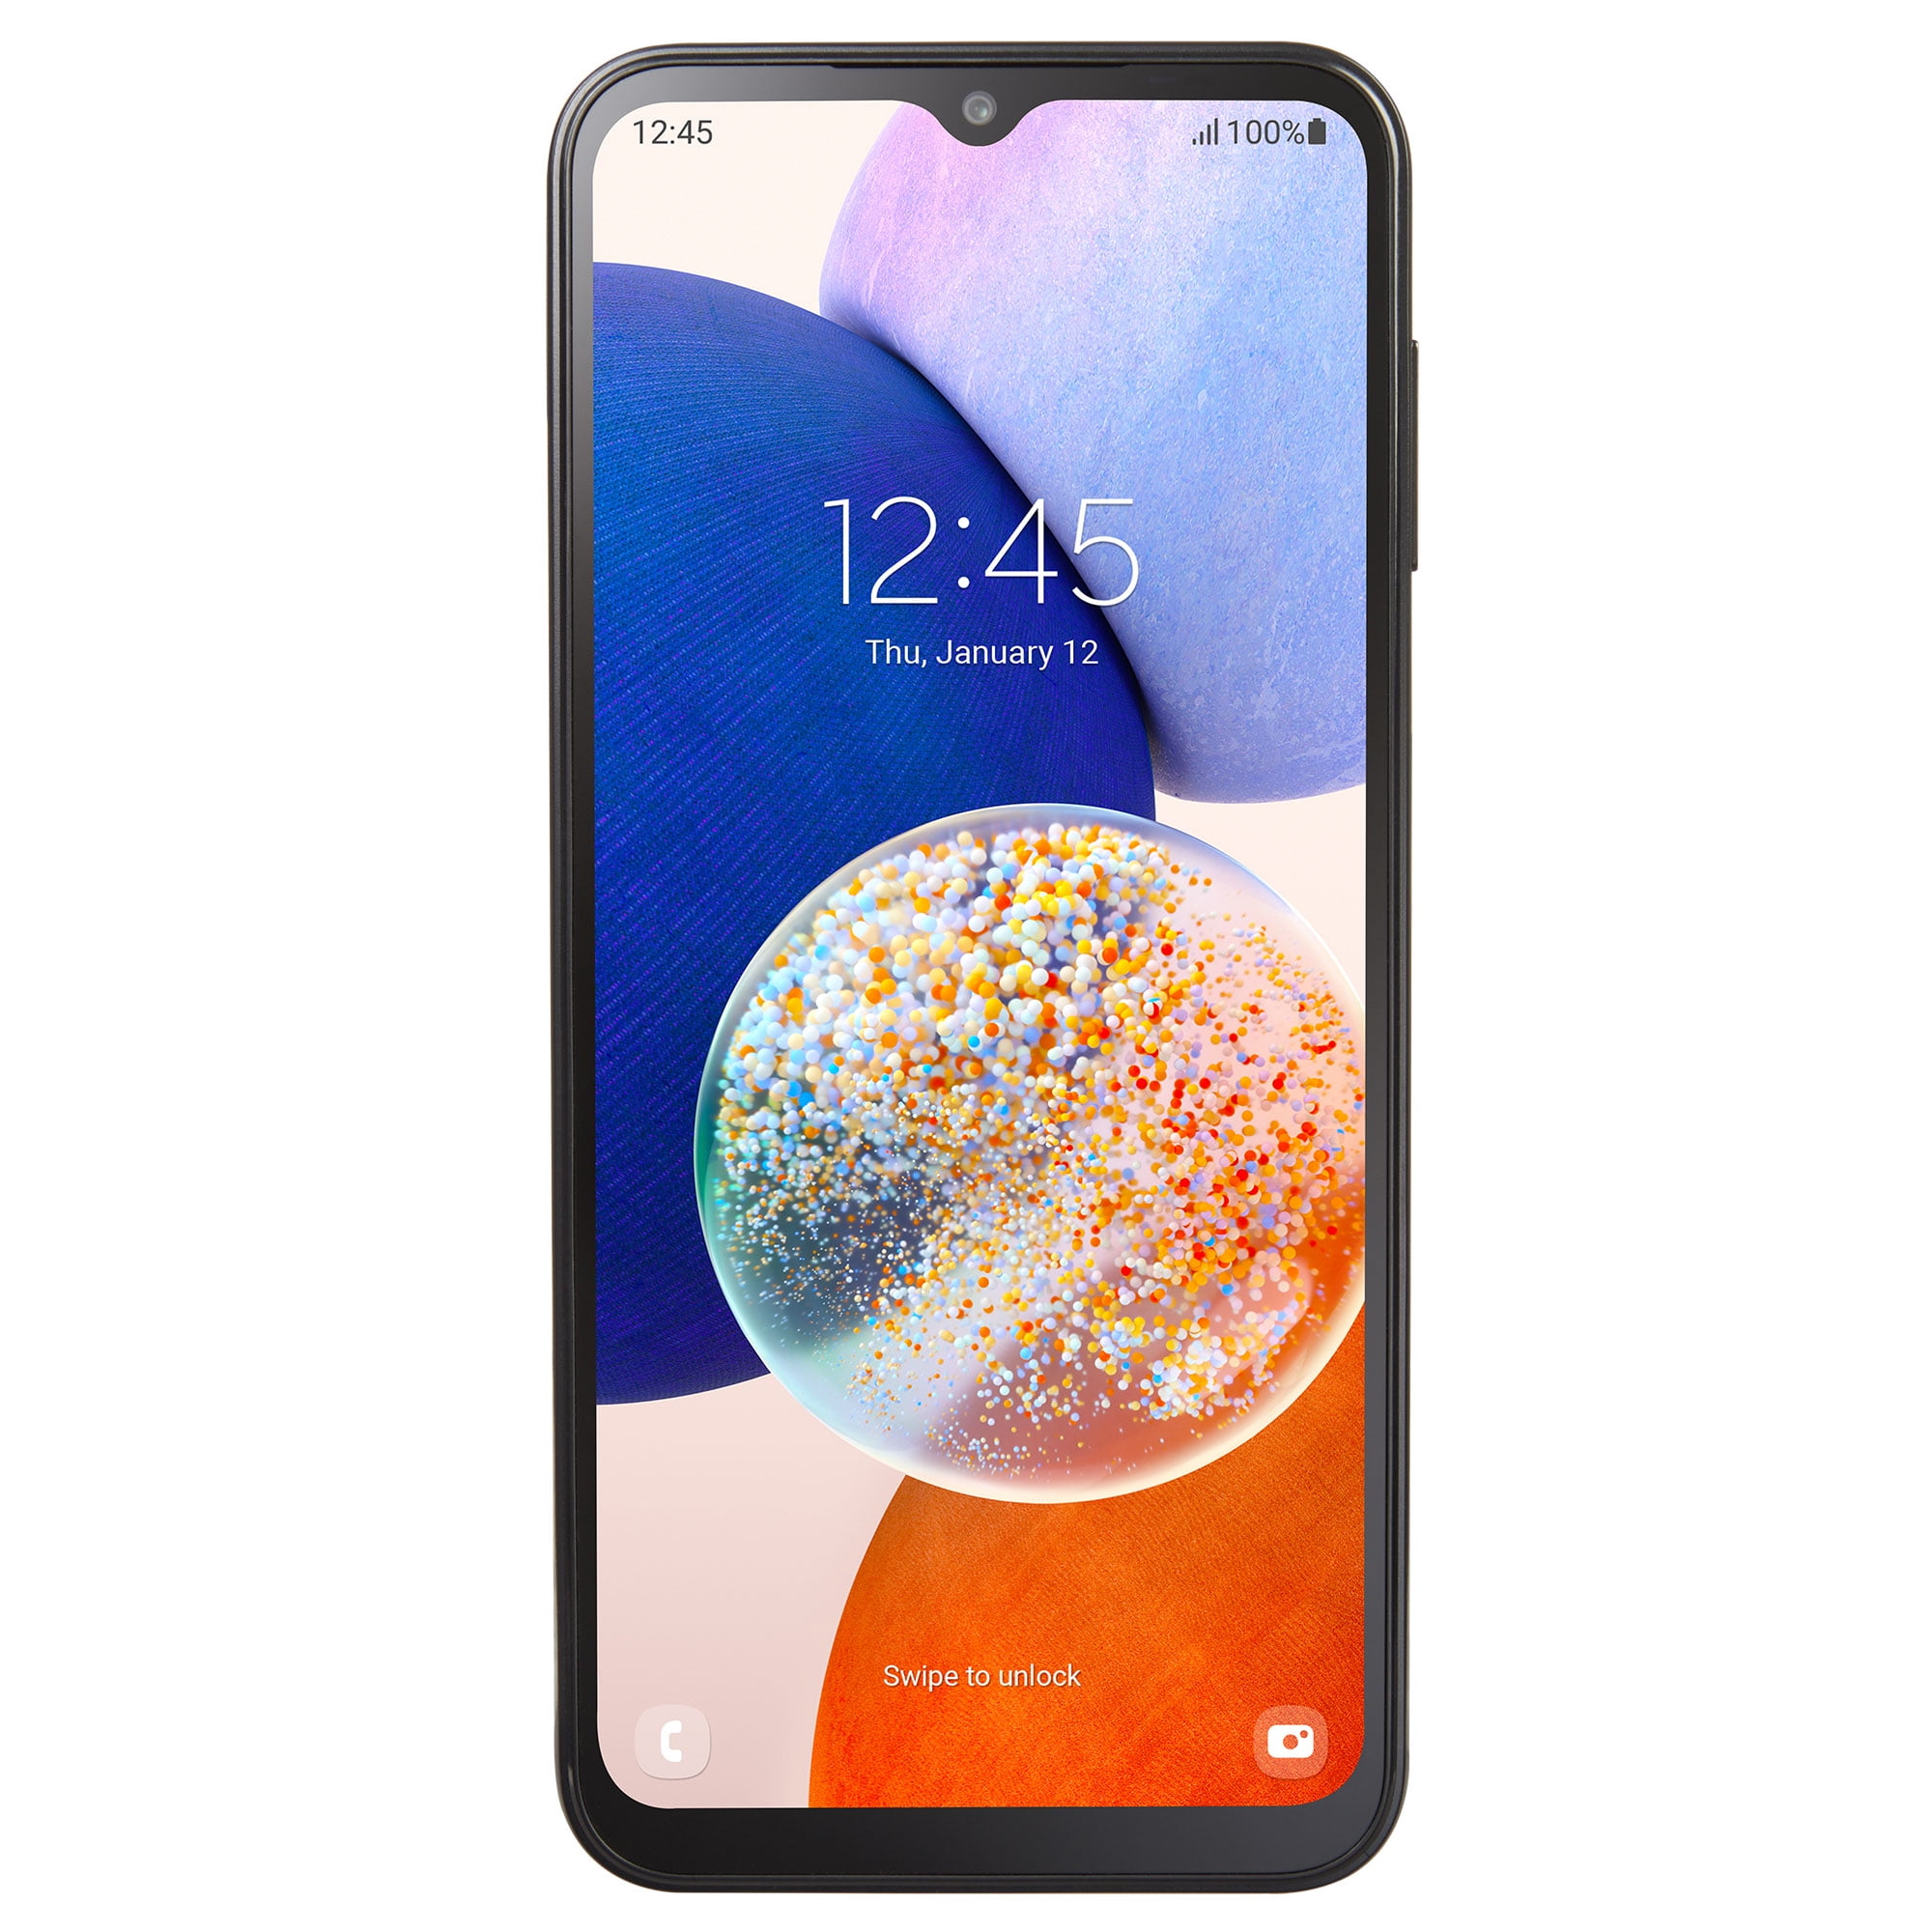 Samsung Galaxy A14 5G Full Specs and Review (2023)